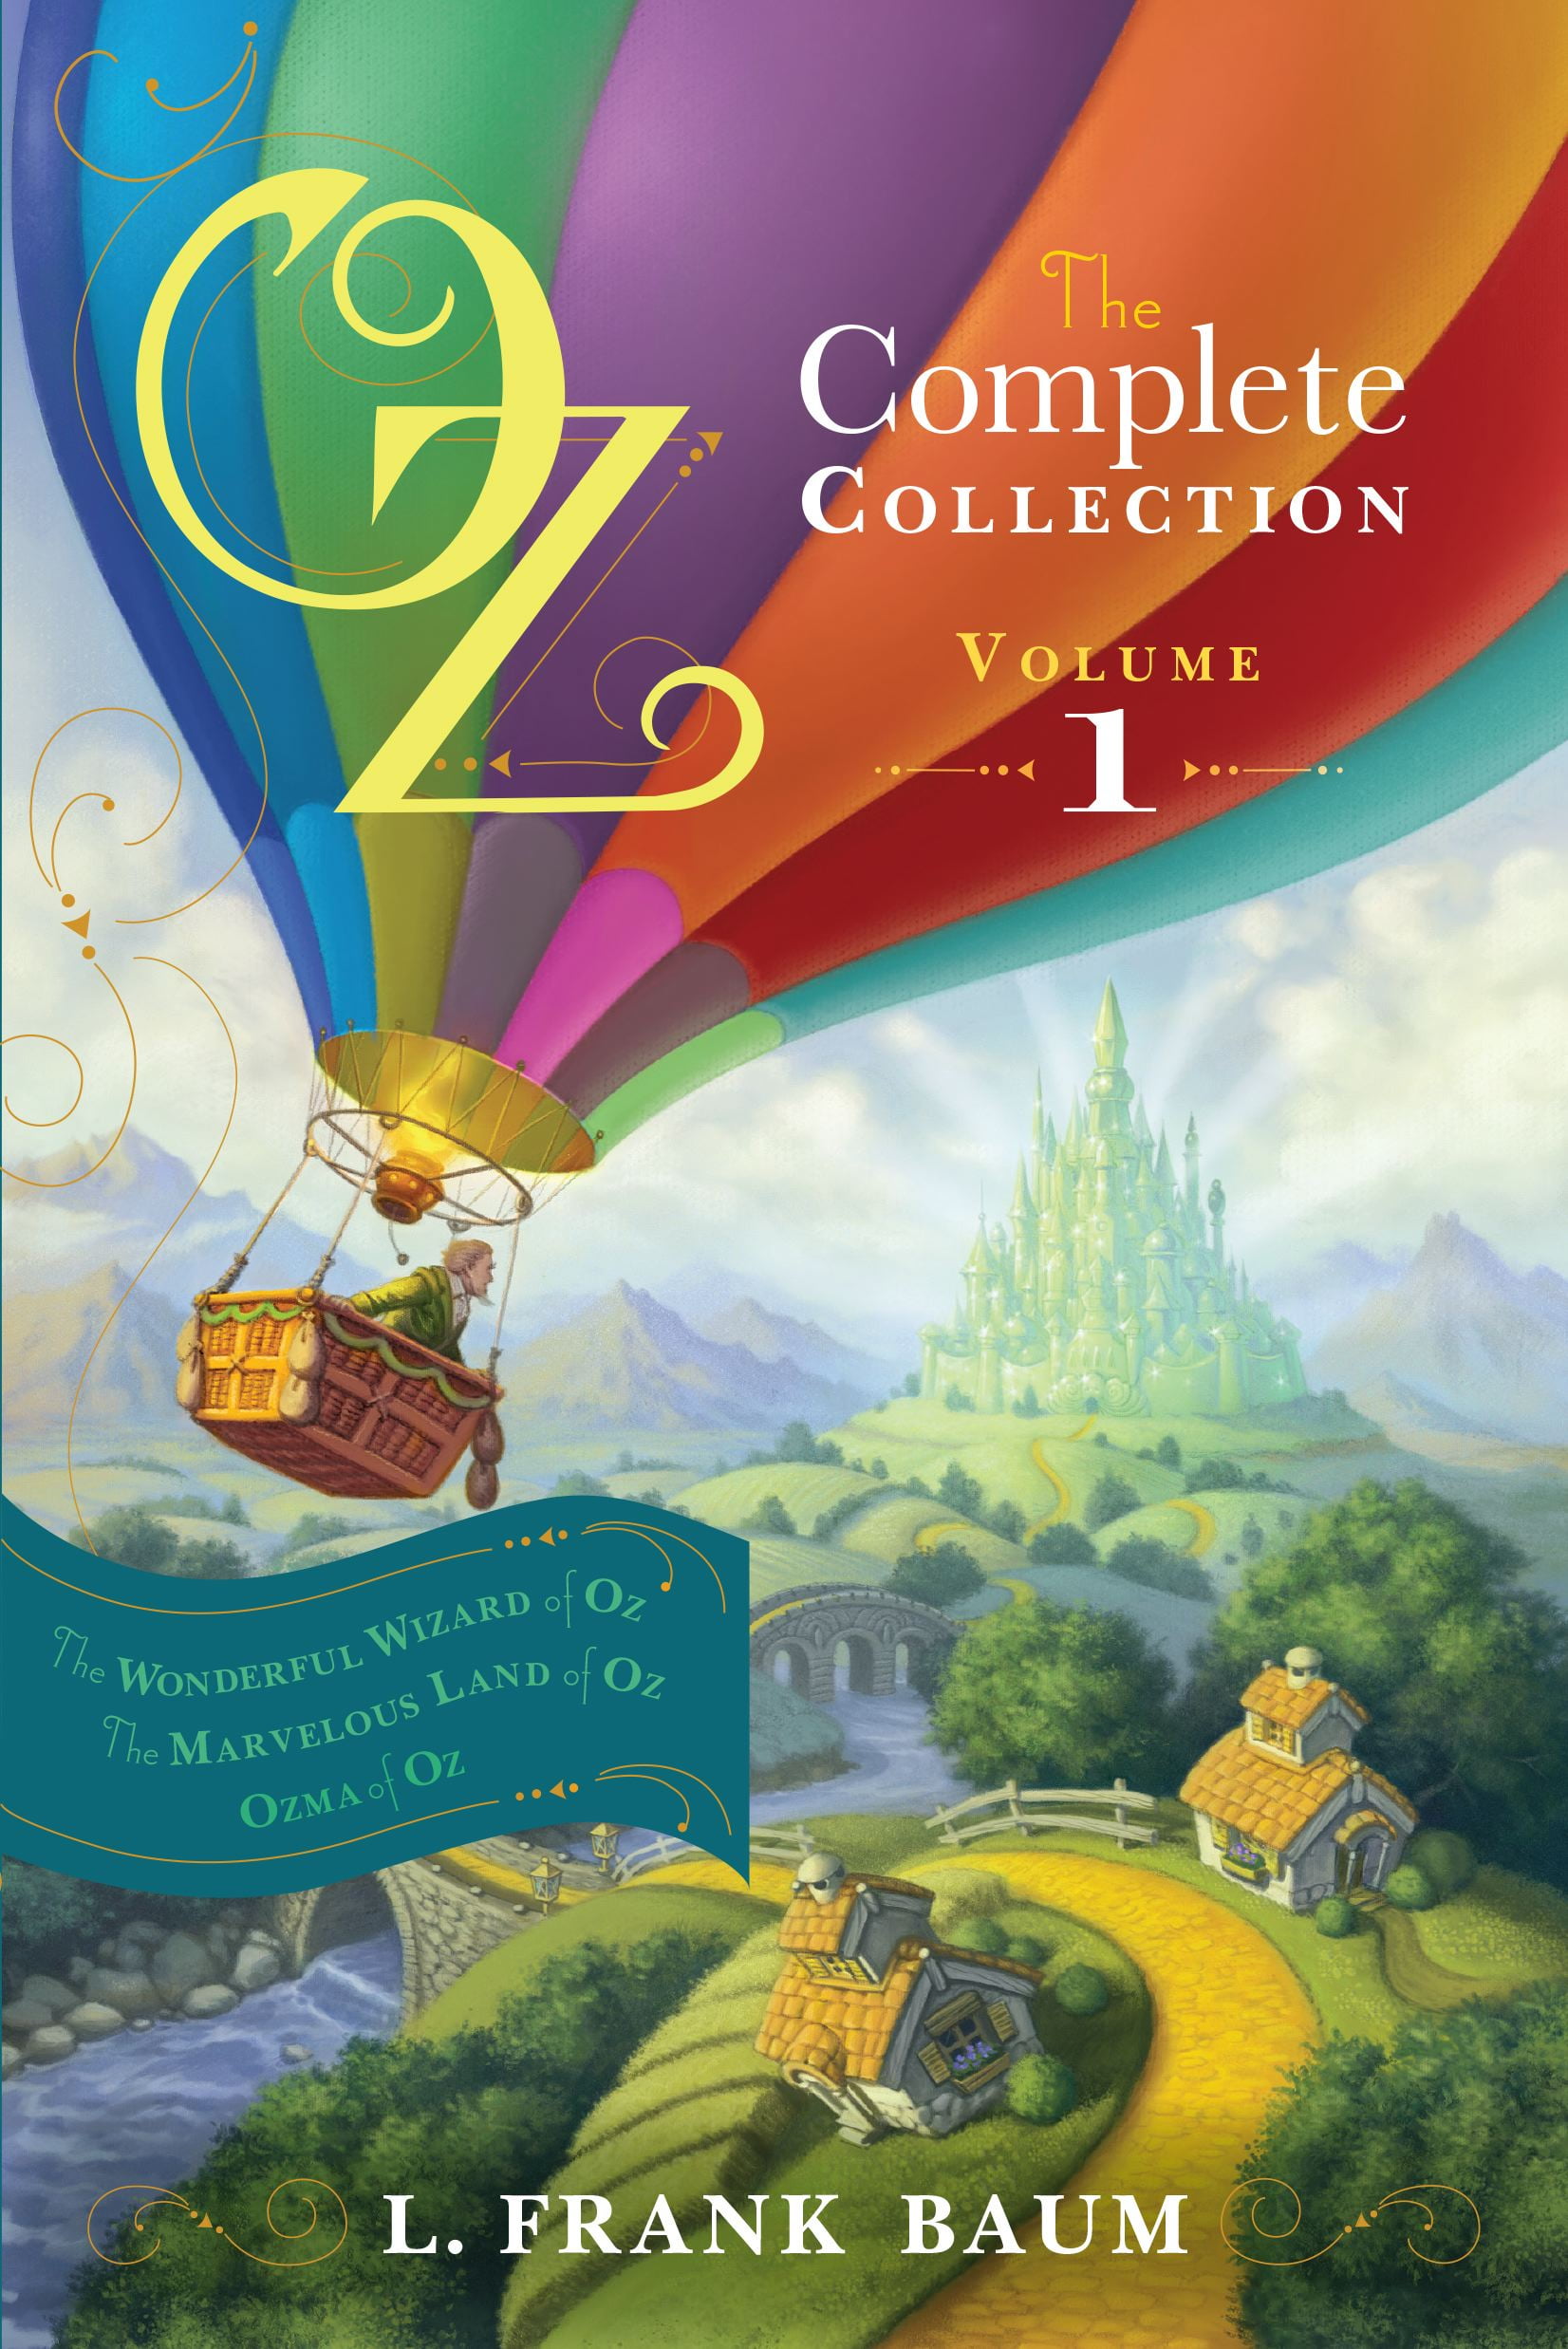 Oz, the Complete Collection, Volume 1 : The Wonderful Wizard of Oz; The